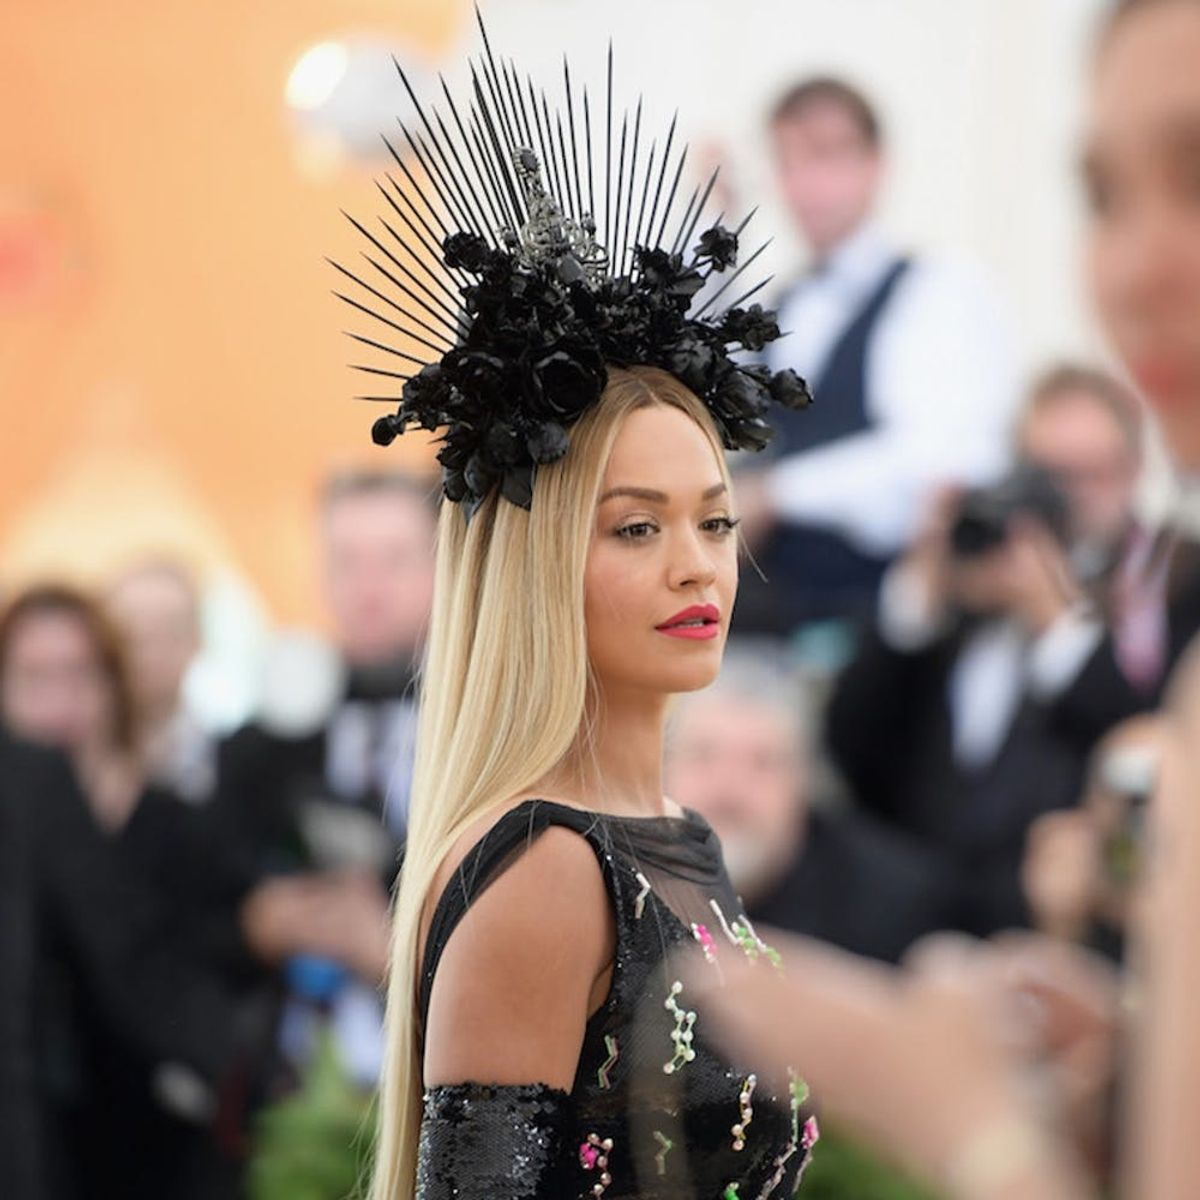 Met Gala 2018 Red Carpet: The Most Epic Headpieces and Hair Accessories of the Night